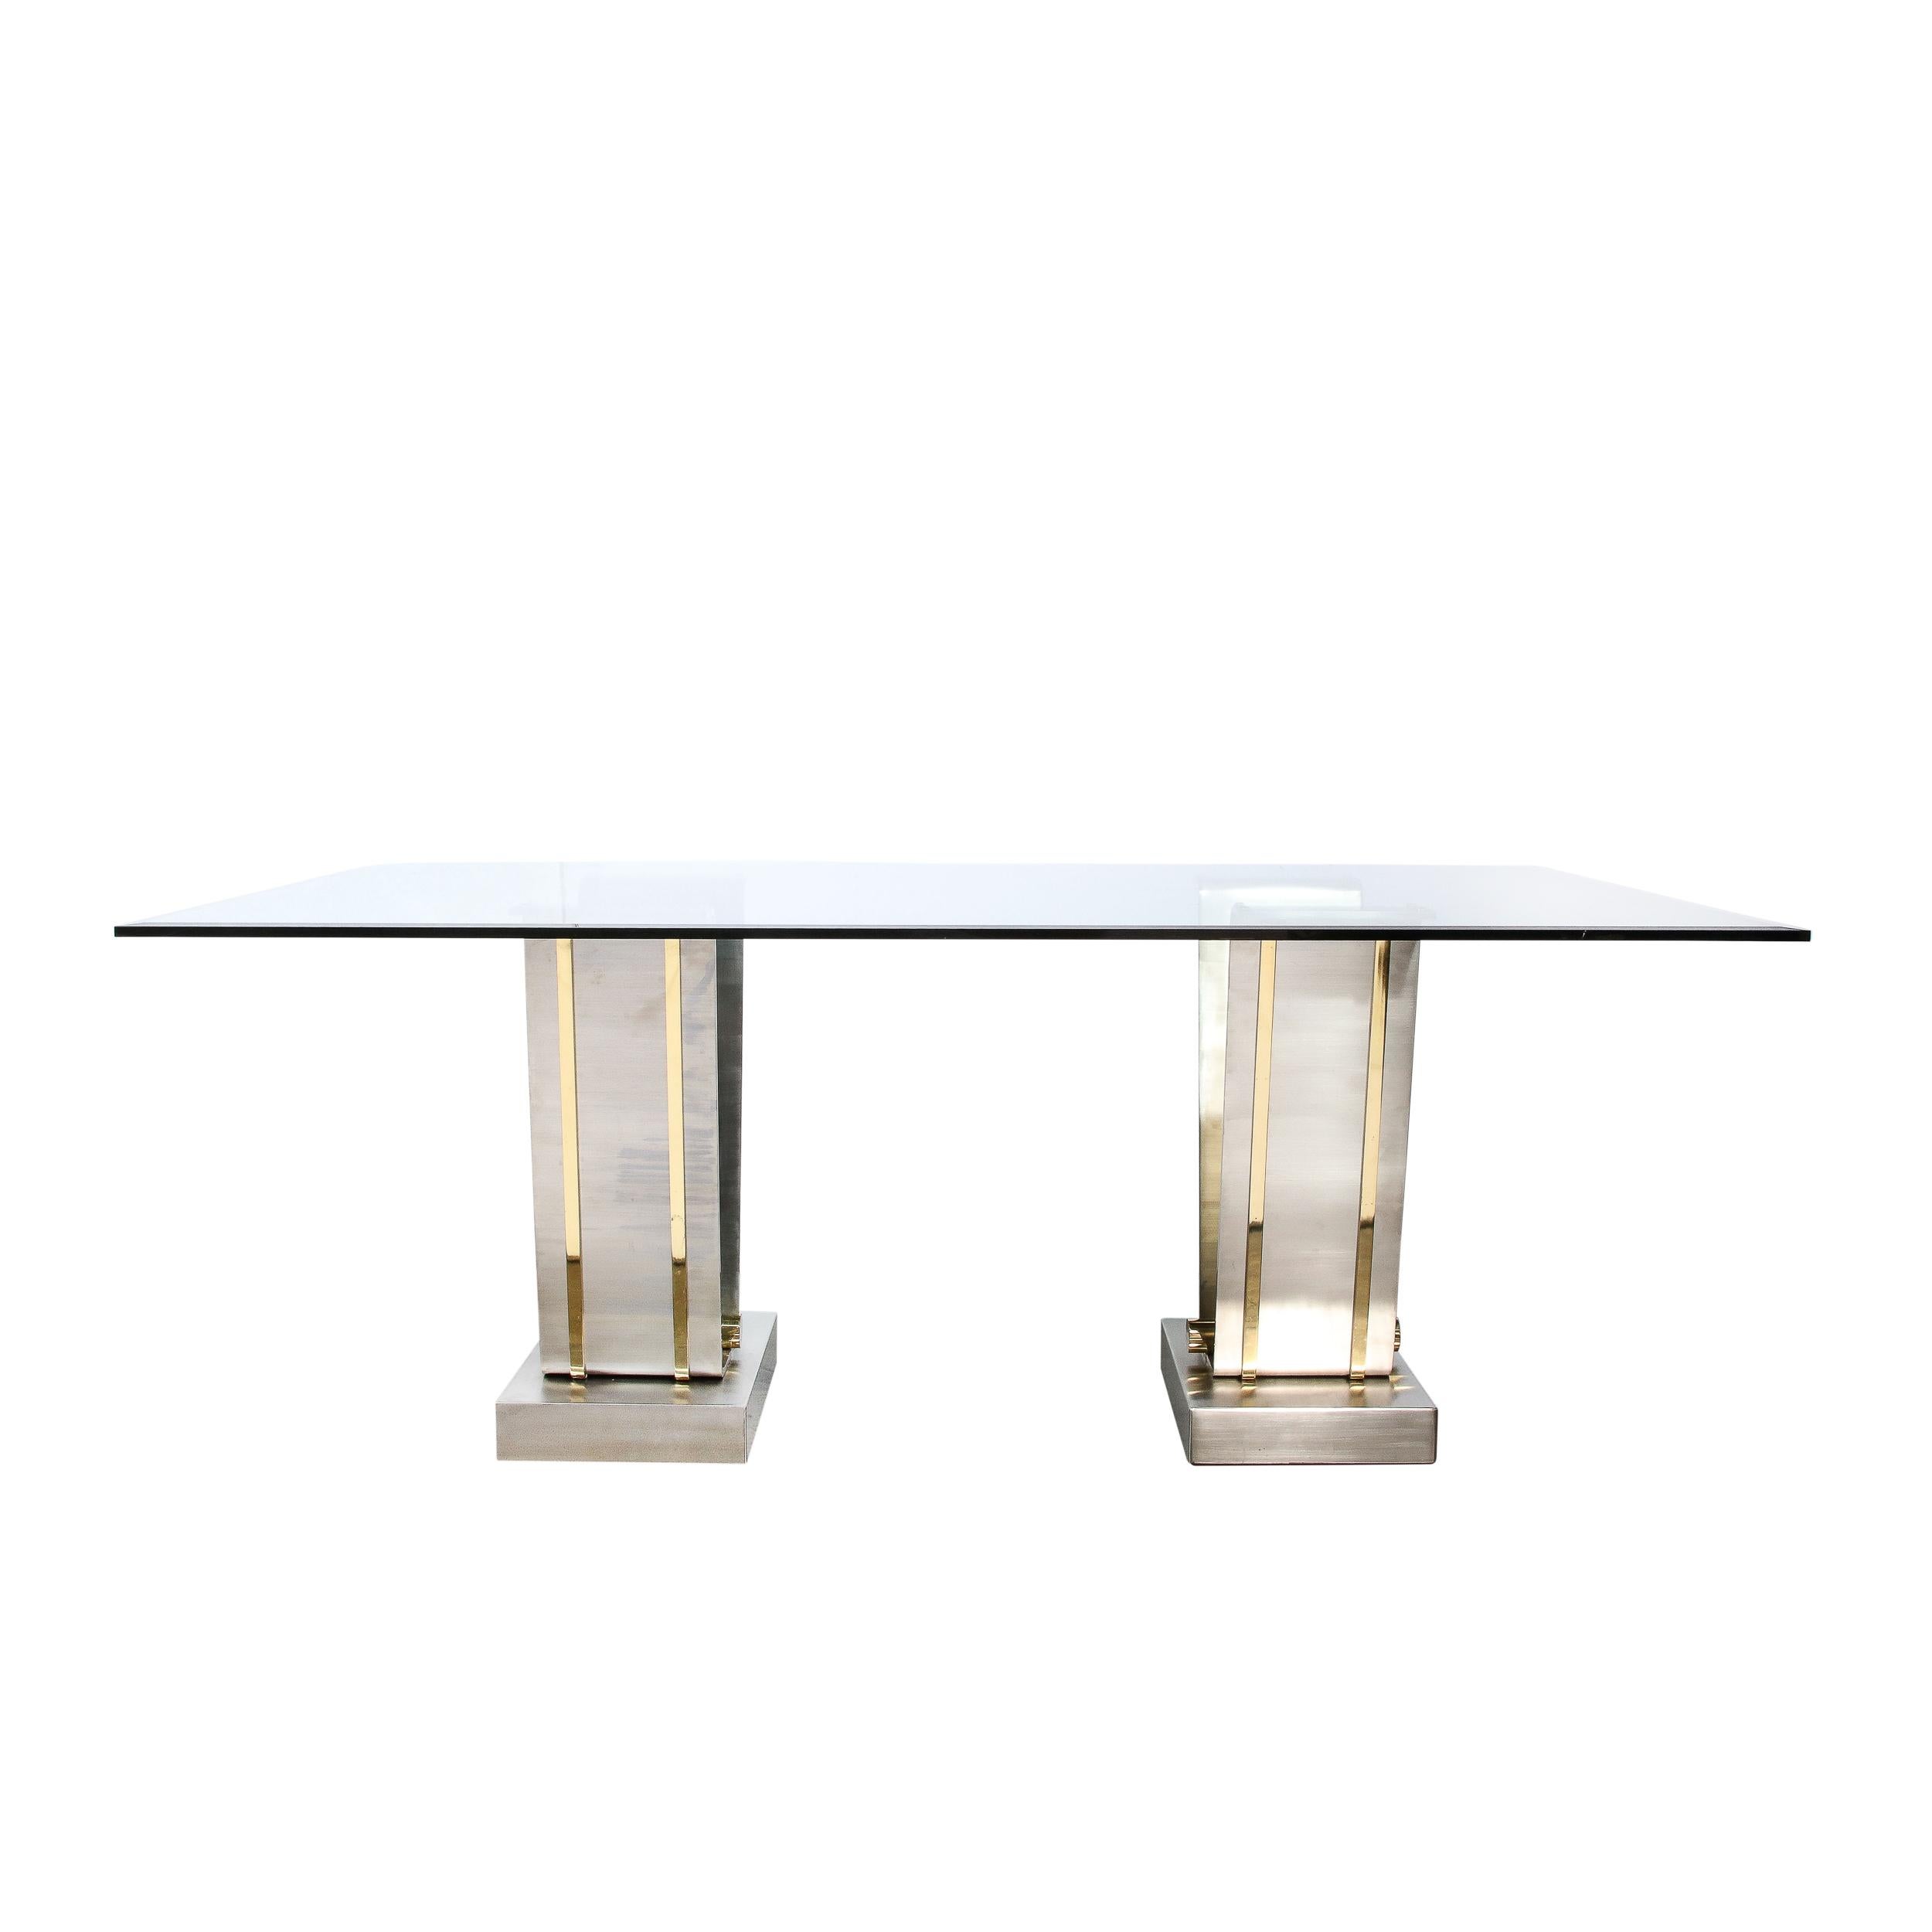 This sleek and elegant Mid-Century Modern table was realized in the United States circa 1970. It features two dramatic V-Form bases in brushed nickel sitting on volumetric rectilinear foundations of the same Material. The rectangular side of the